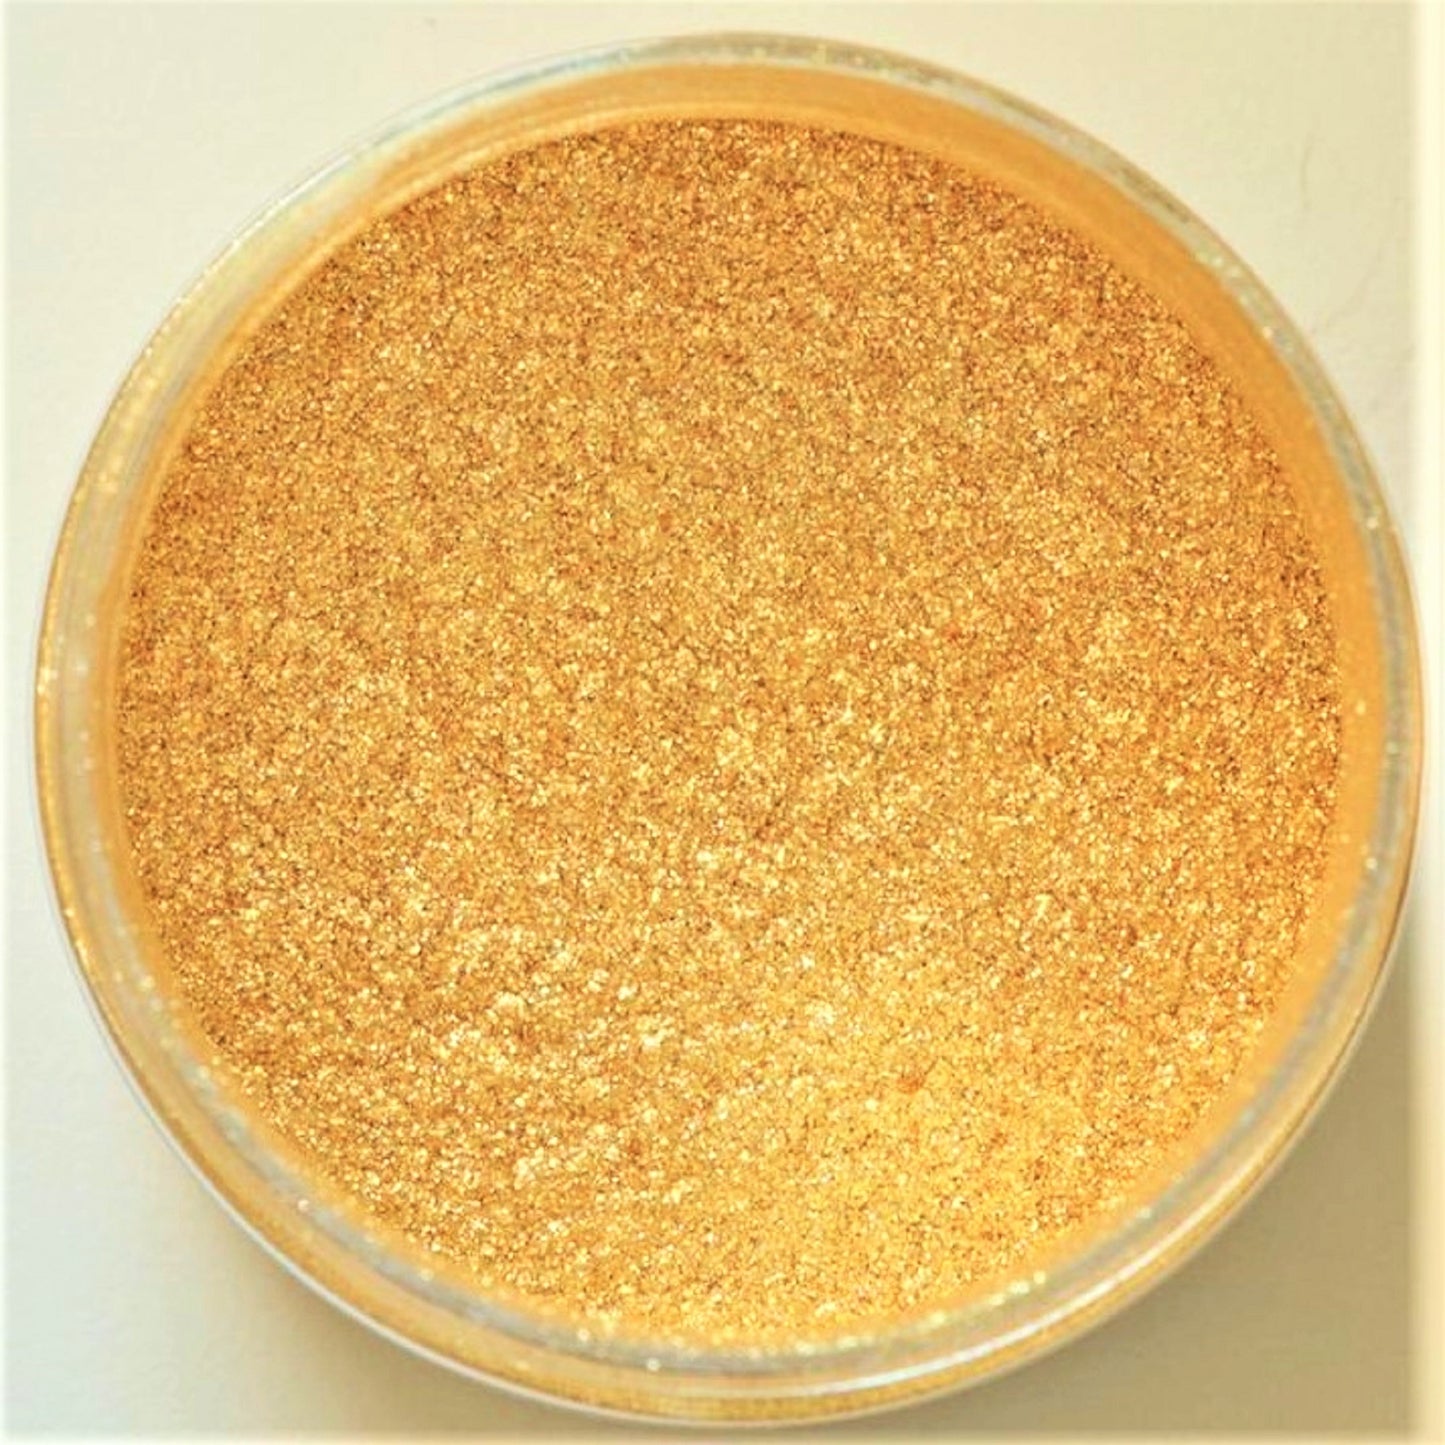 Mica Powdered Pigments - 25g